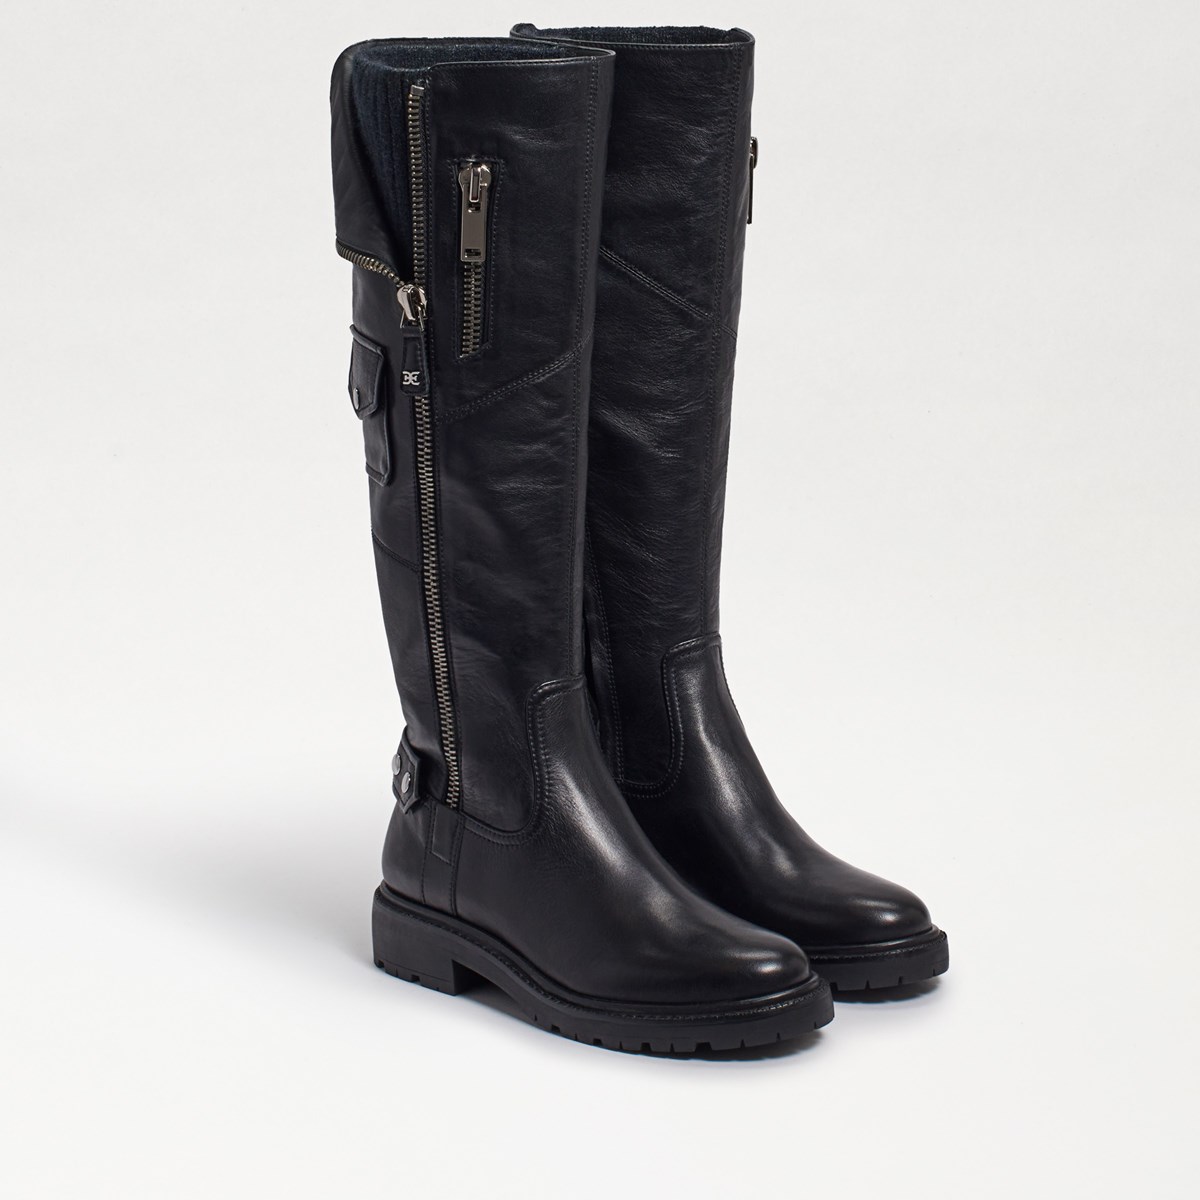 Lacy Zip Up Riding Boot - Pair